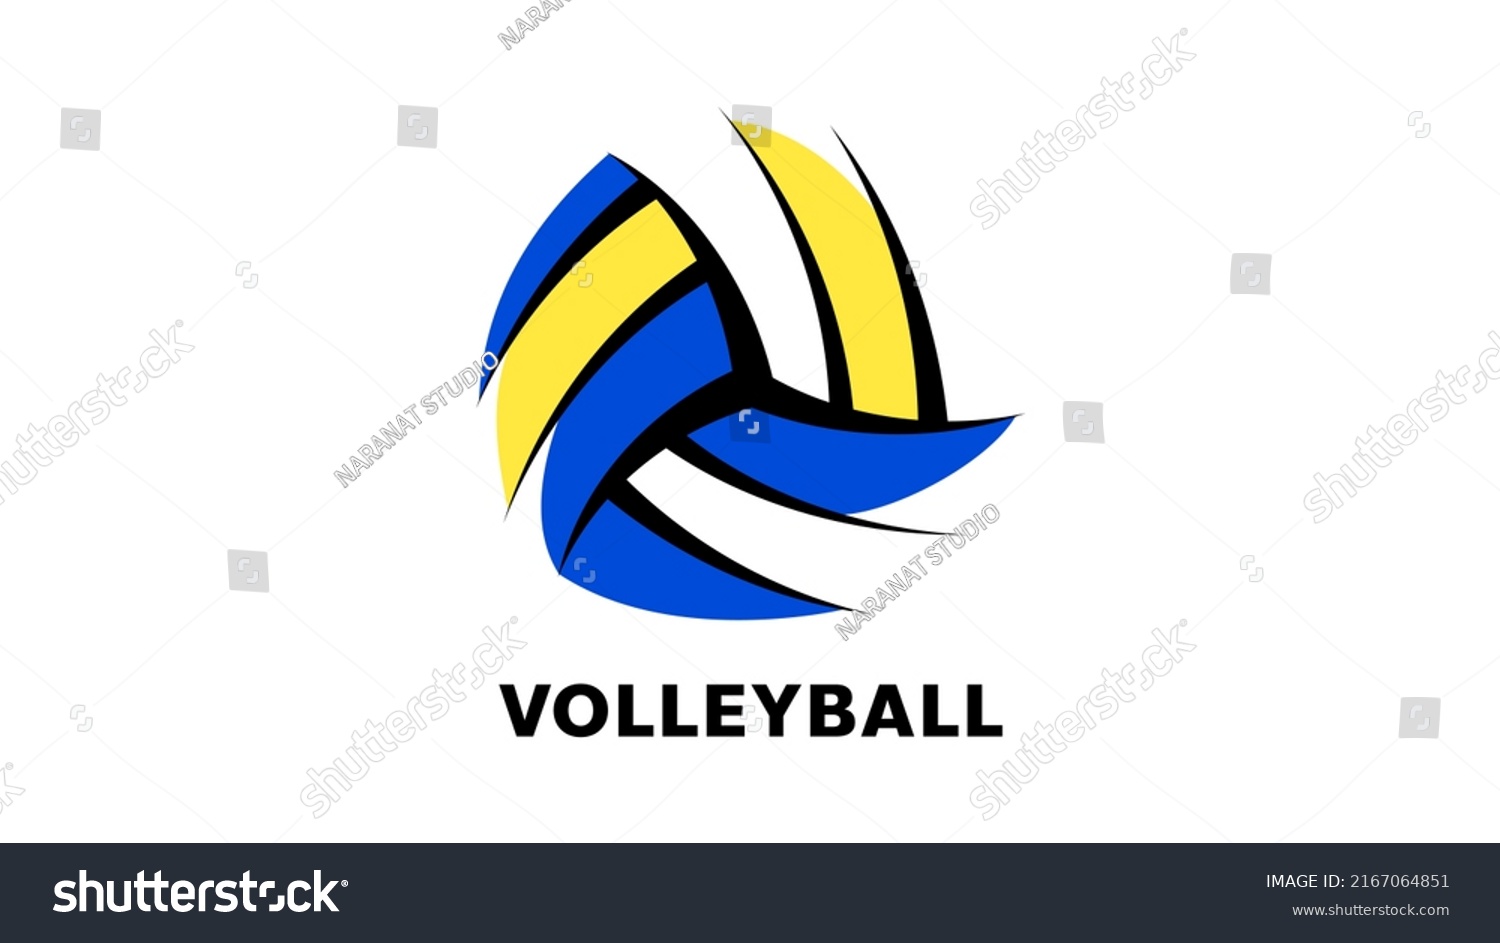 Volleyball Logo Isolated On White Background Stock Vector (Royalty Free ...